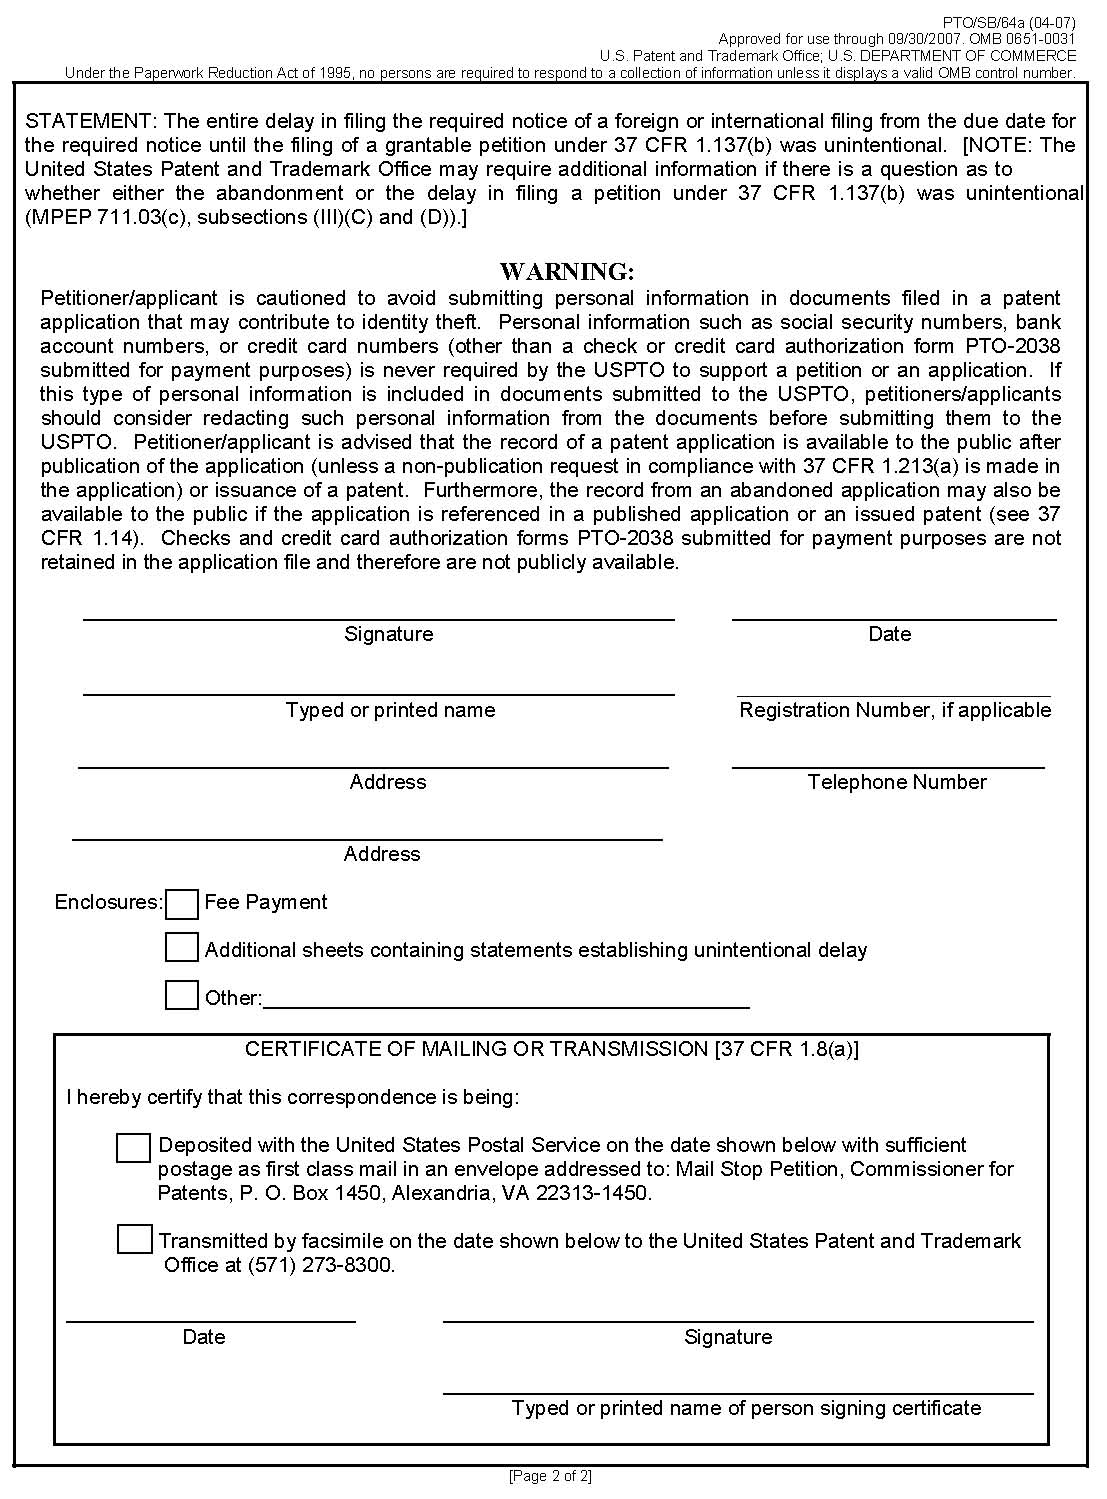 page 2 form pto/sb/64a petition for revival of an application for patent abandoned for failure to notify the office of a foreign or international filing (37 cfr 1.137(f).